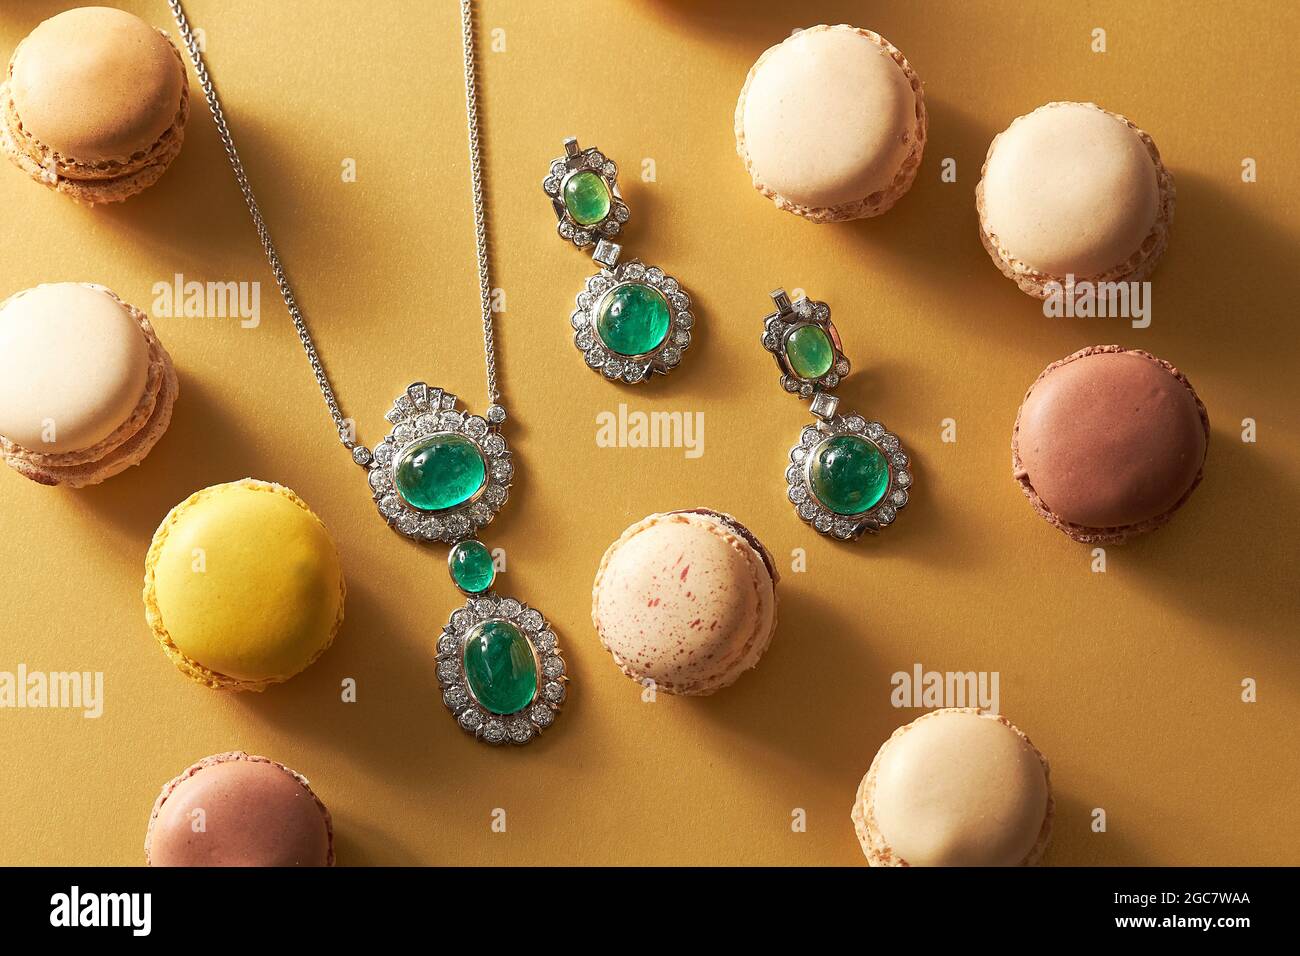 High angle shot of a necklace and earrings with blue beads next to delicious macarons Stock Photo